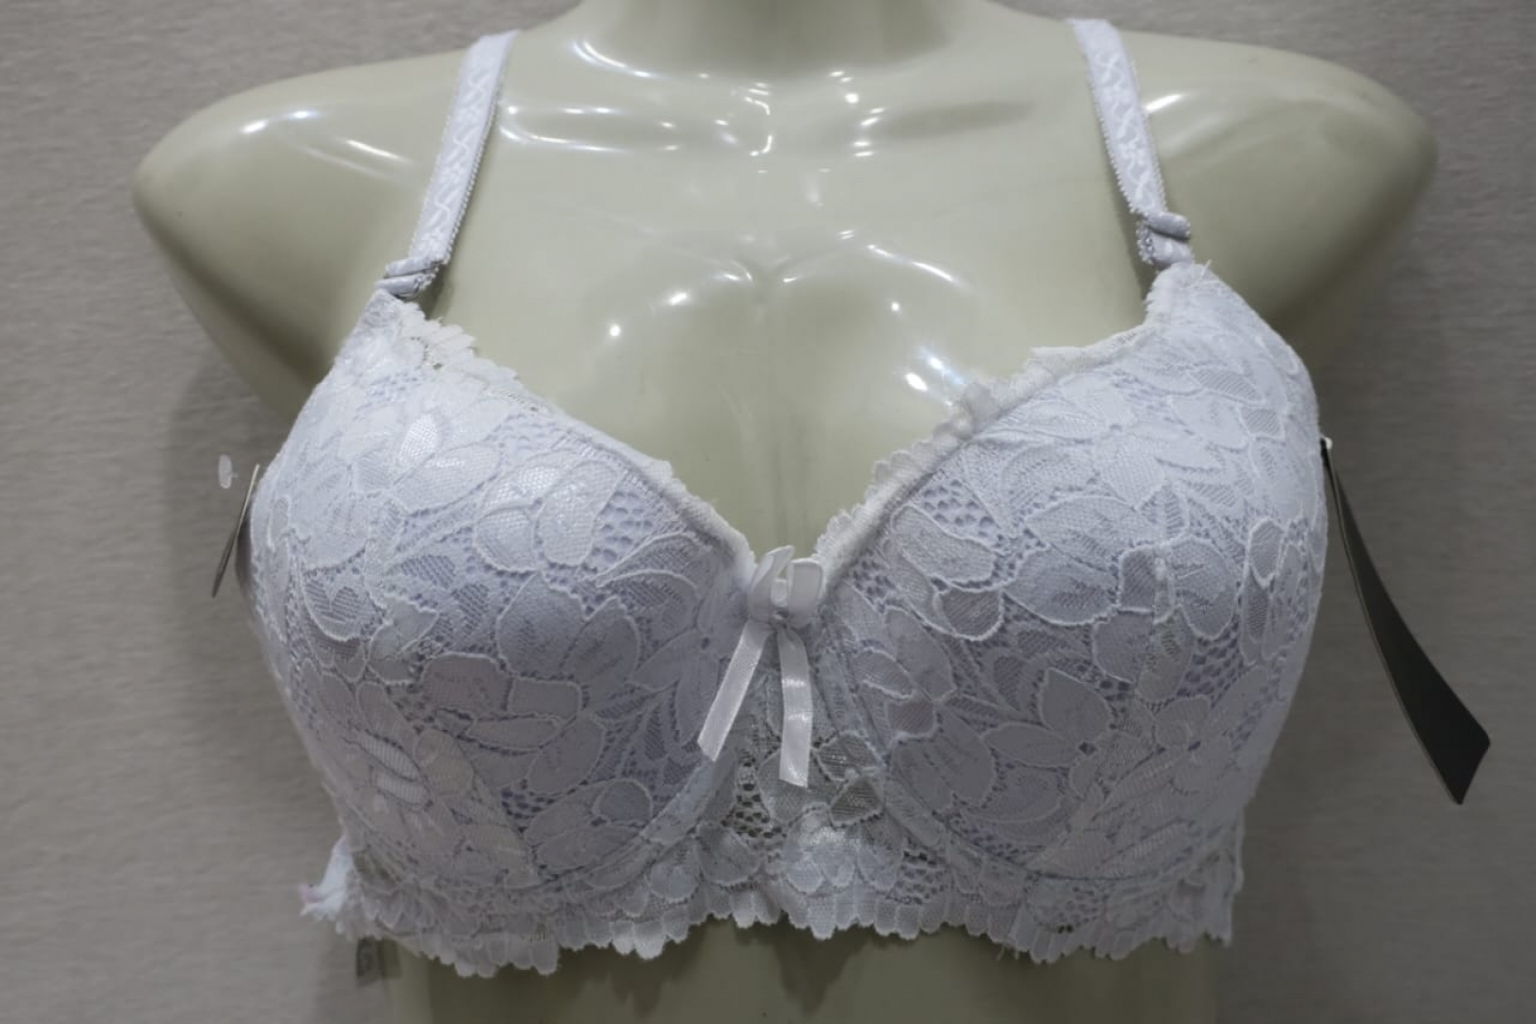 Double Padded Bra For Girls With Lace Detailing  Online Shopping In  Pakistan - Undergarments - Jewellery 